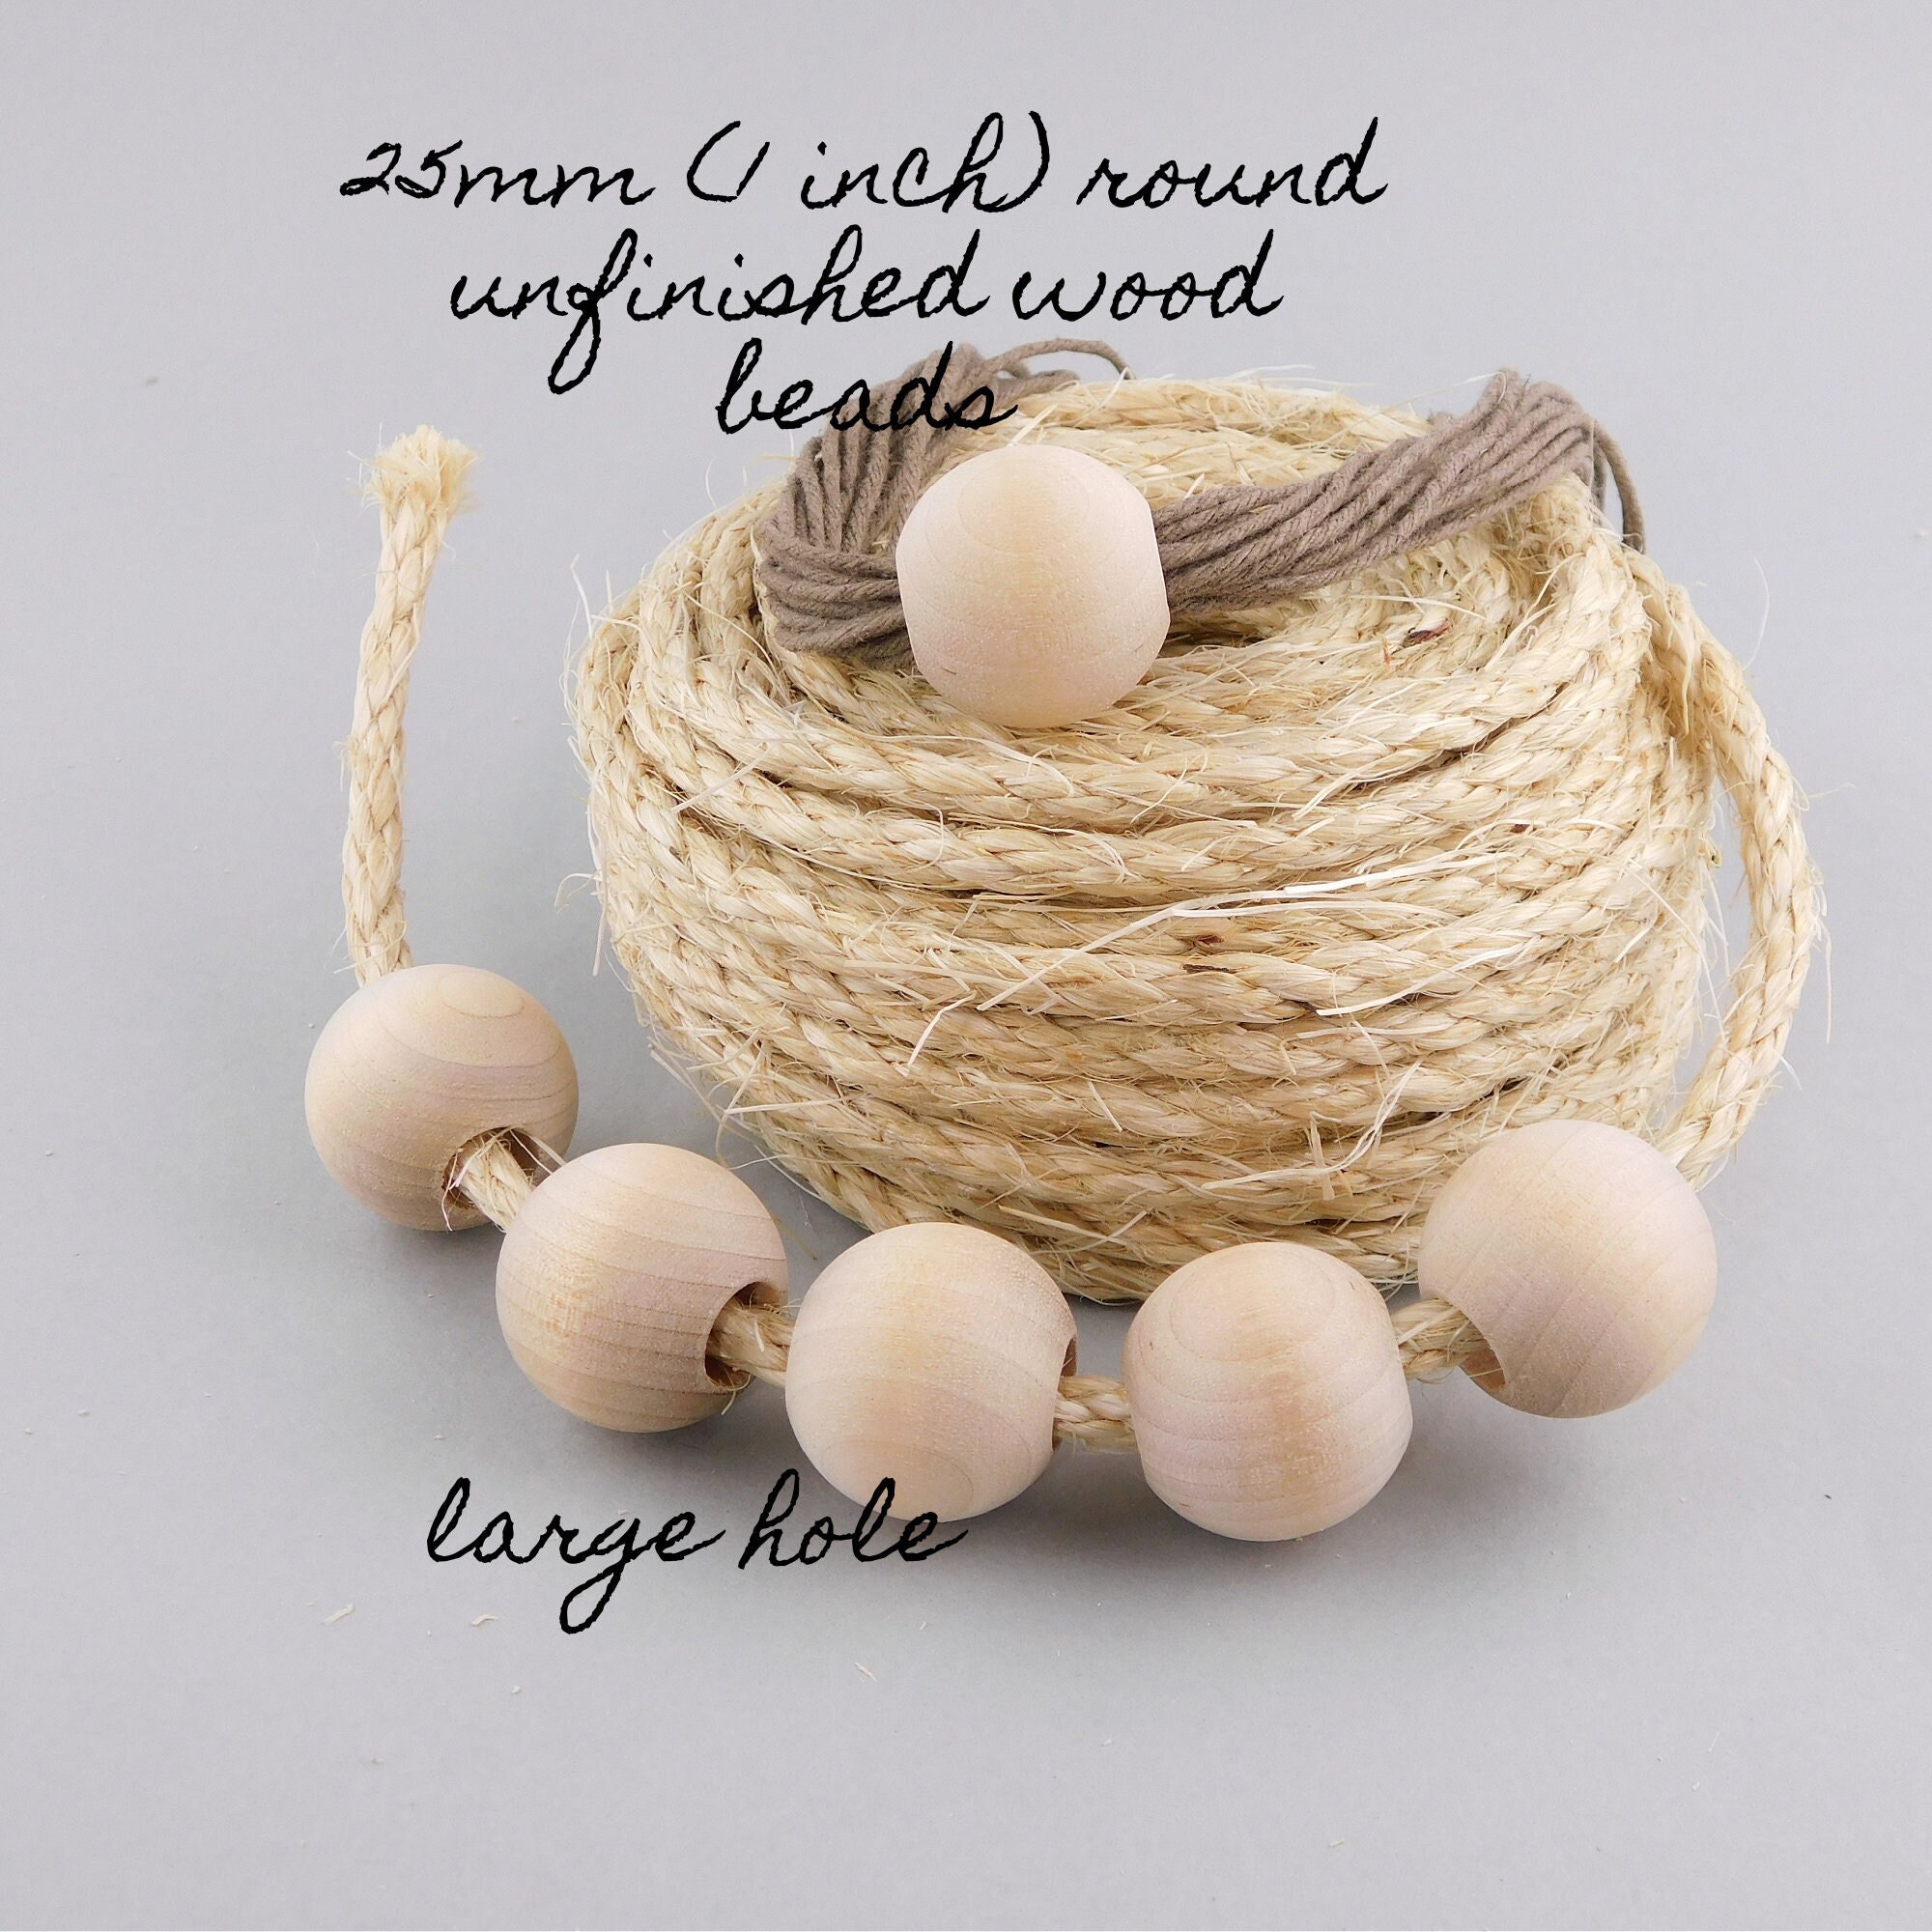 20mm 3/4 Inch Round Natural Unfinished Wooden Beads/diy Wood